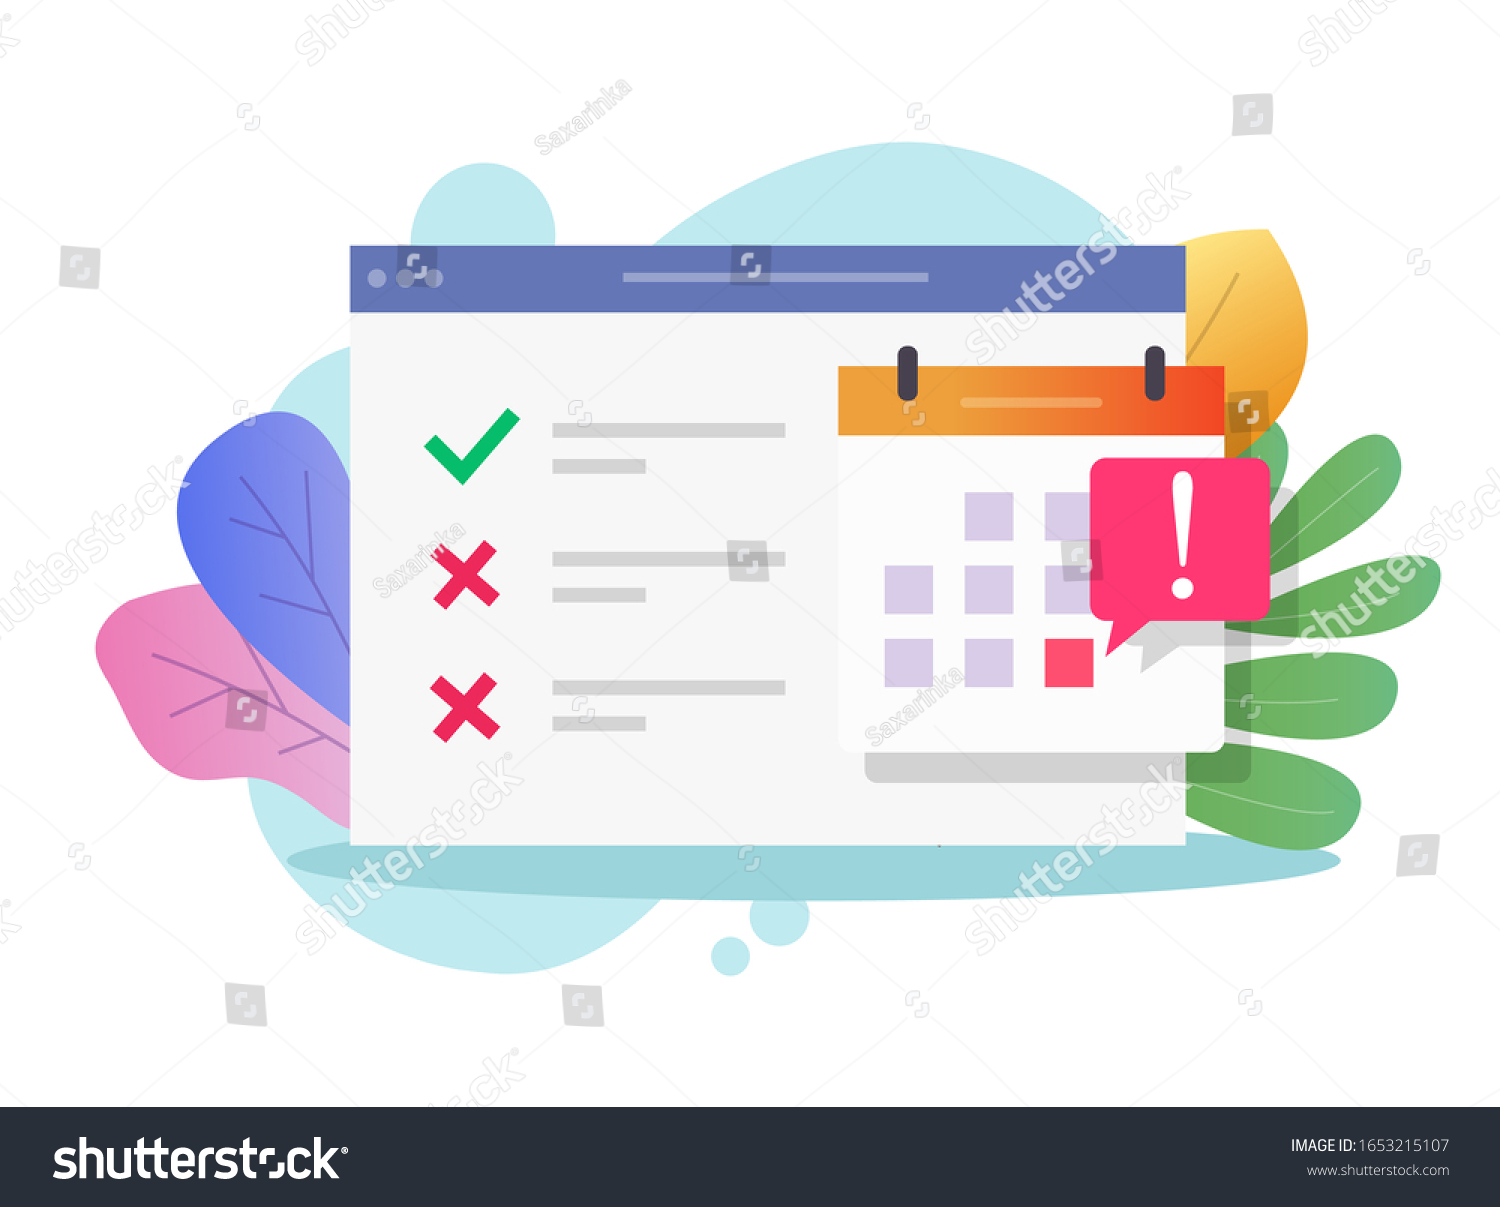 SVG of Calendar due deadline online bad note on website as unsuccessful important event reminder icon vector flat cartoon, illustrated agenda web bowser with not done task list timetable modern svg